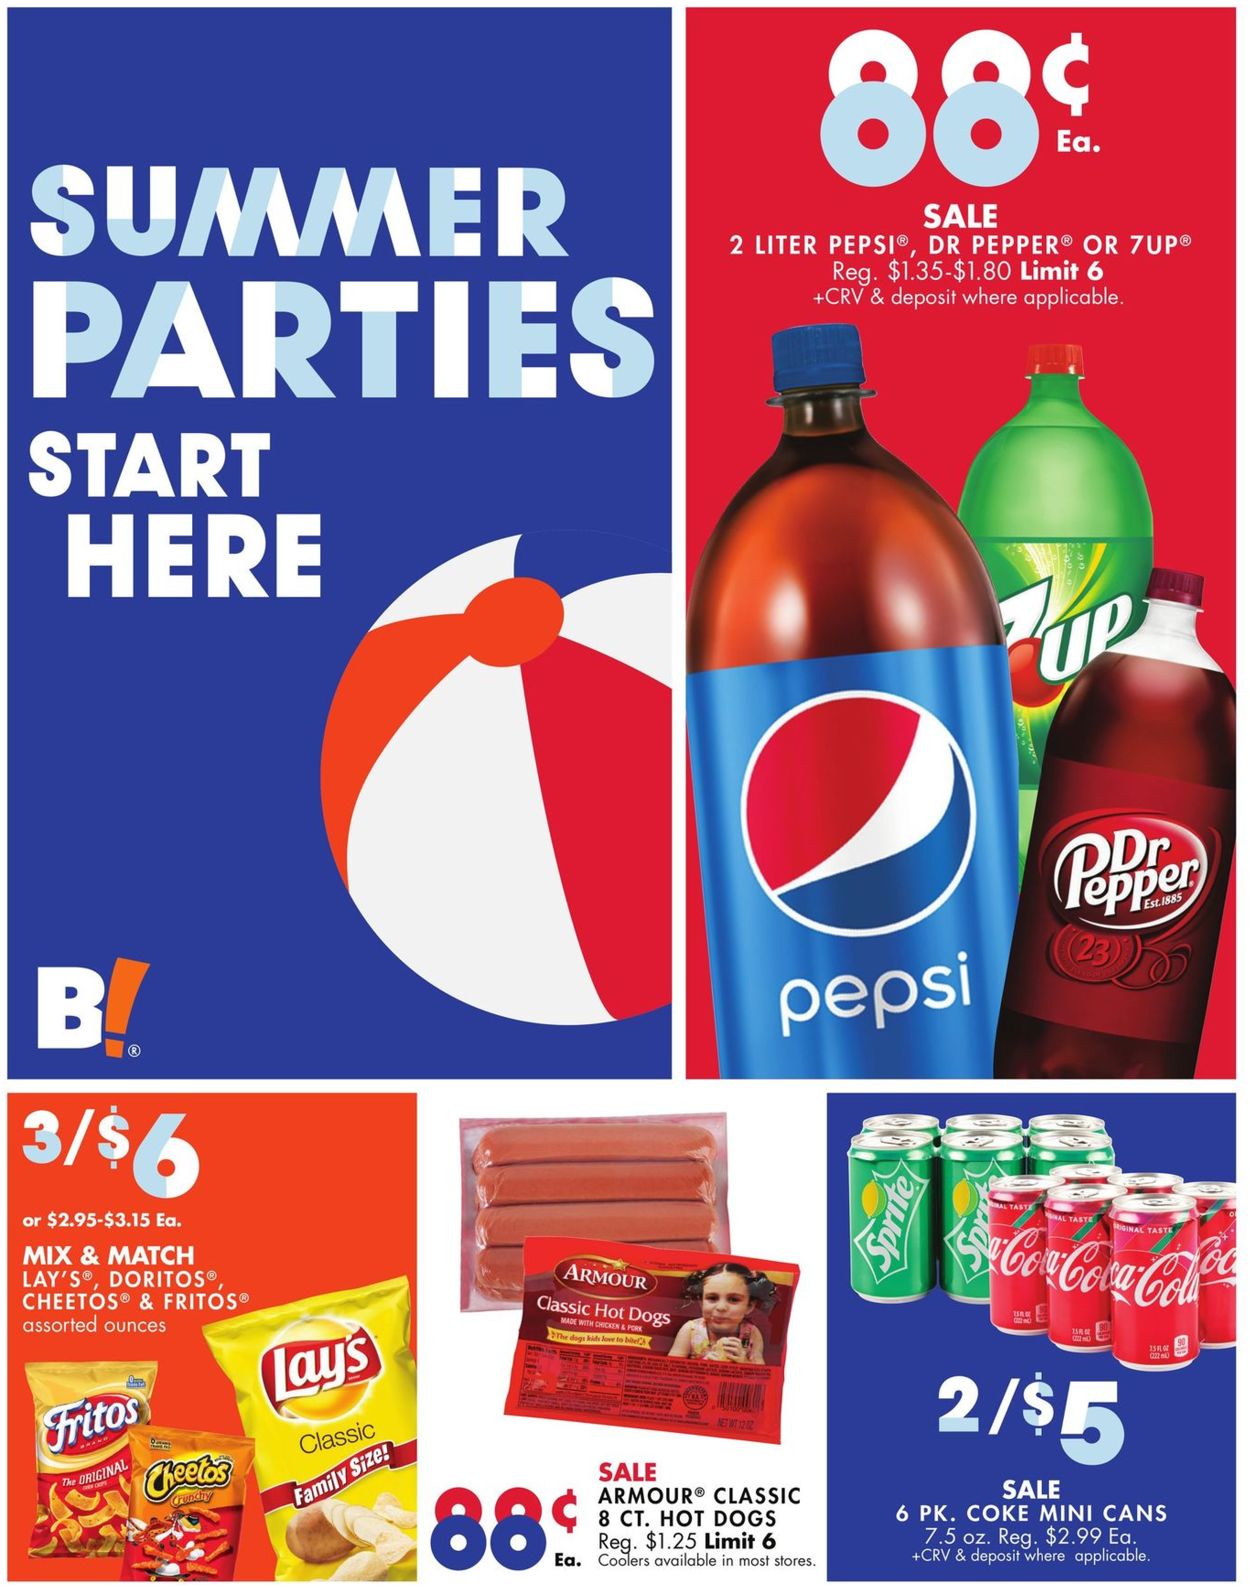 Big Lots Current weekly ad 05/18 - 06/01/2019 [21] - frequent-ads.com